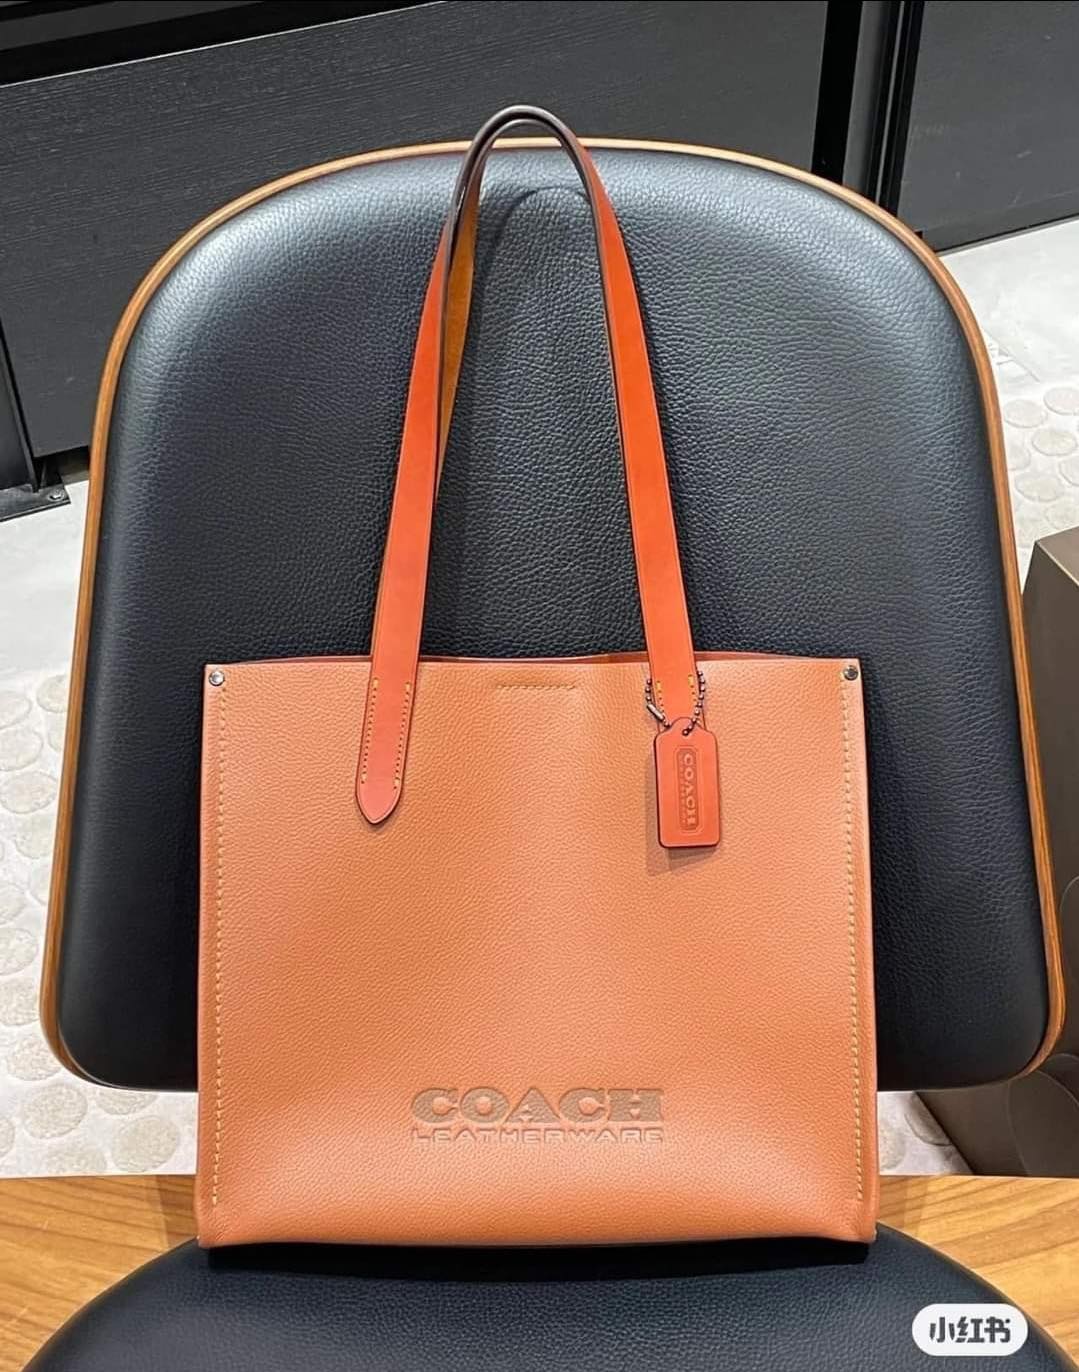 Coach Women's Nomad Tote Bag in Black | Leather